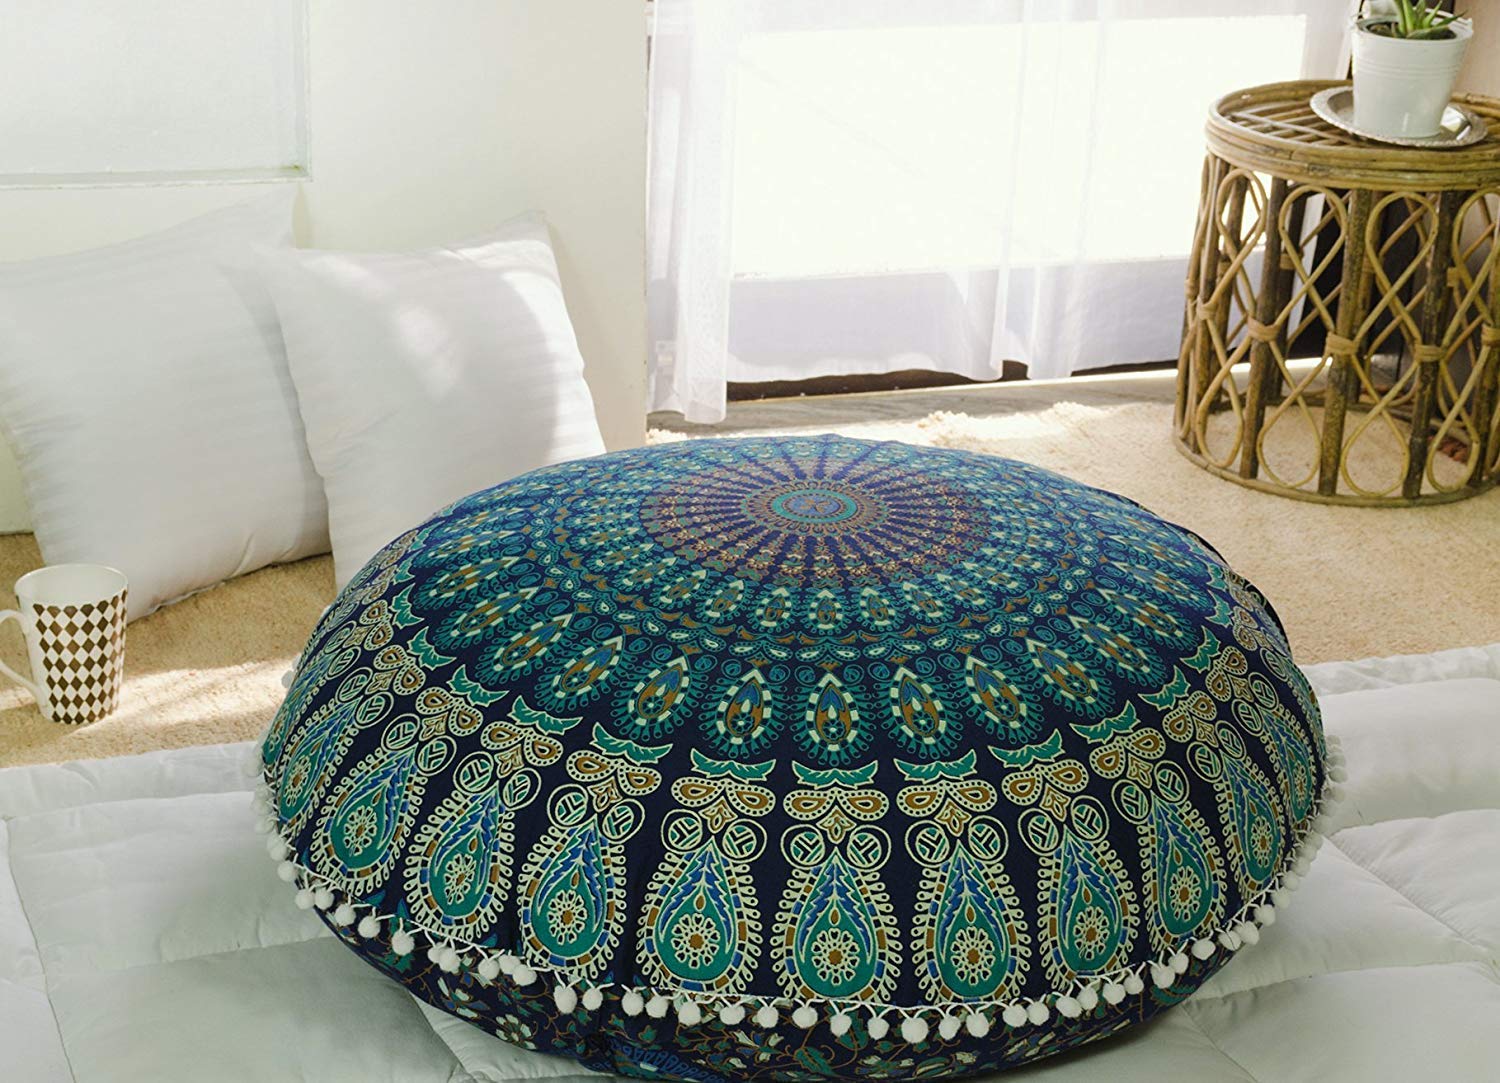 Floor Pillows & Outdoor Cushions - Large, Oversized Cushions | Royal